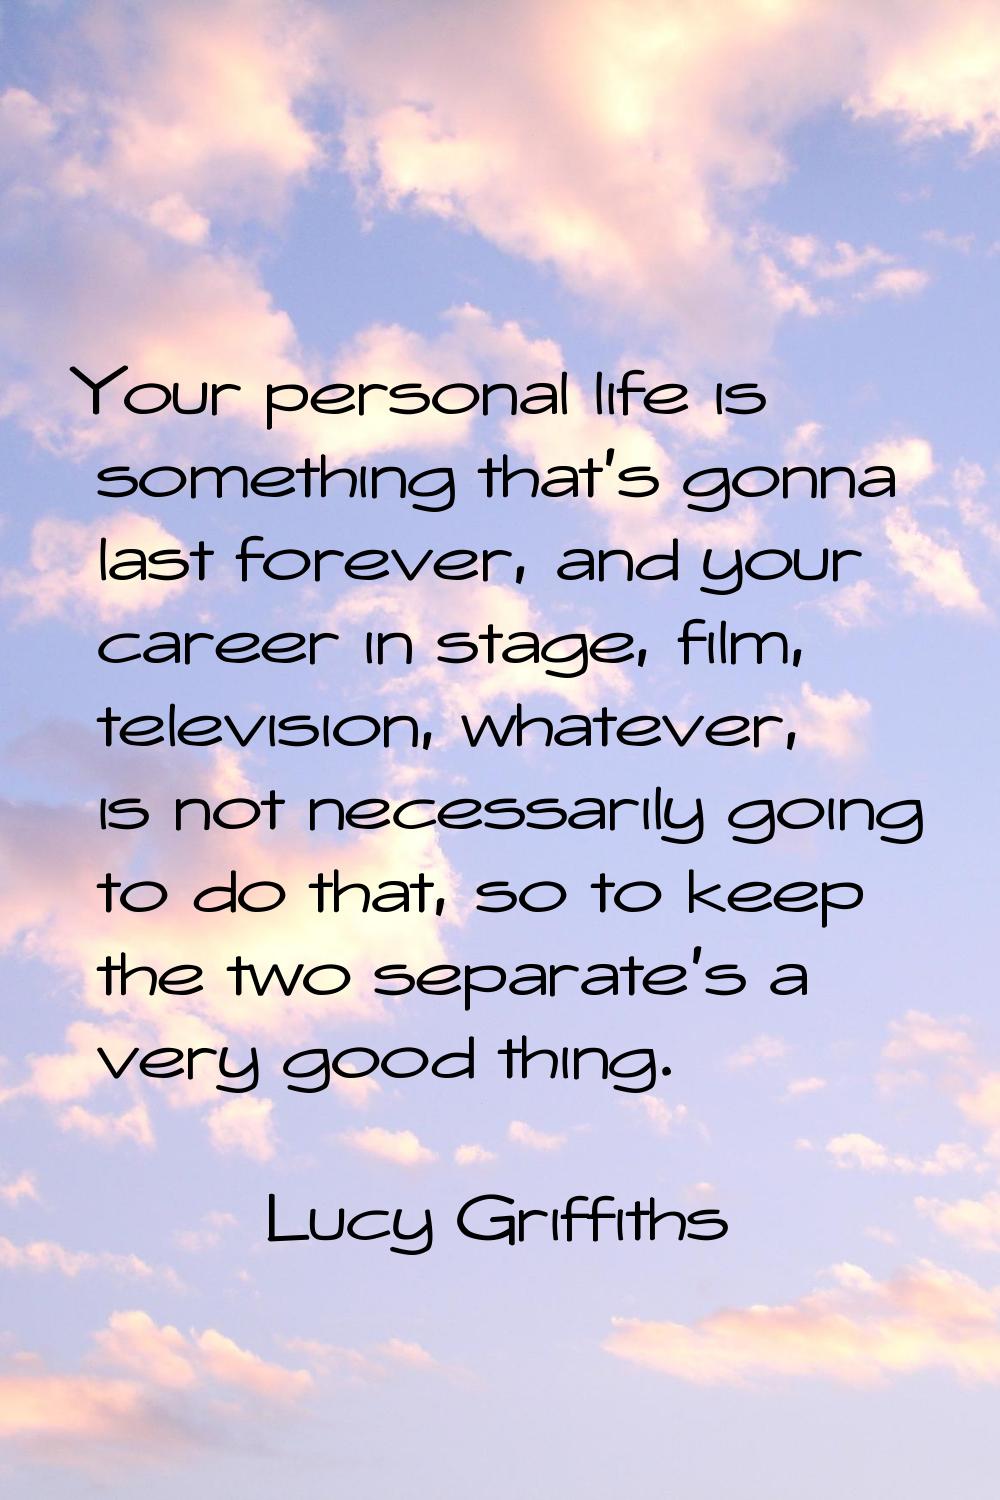 Your personal life is something that's gonna last forever, and your career in stage, film, televisi